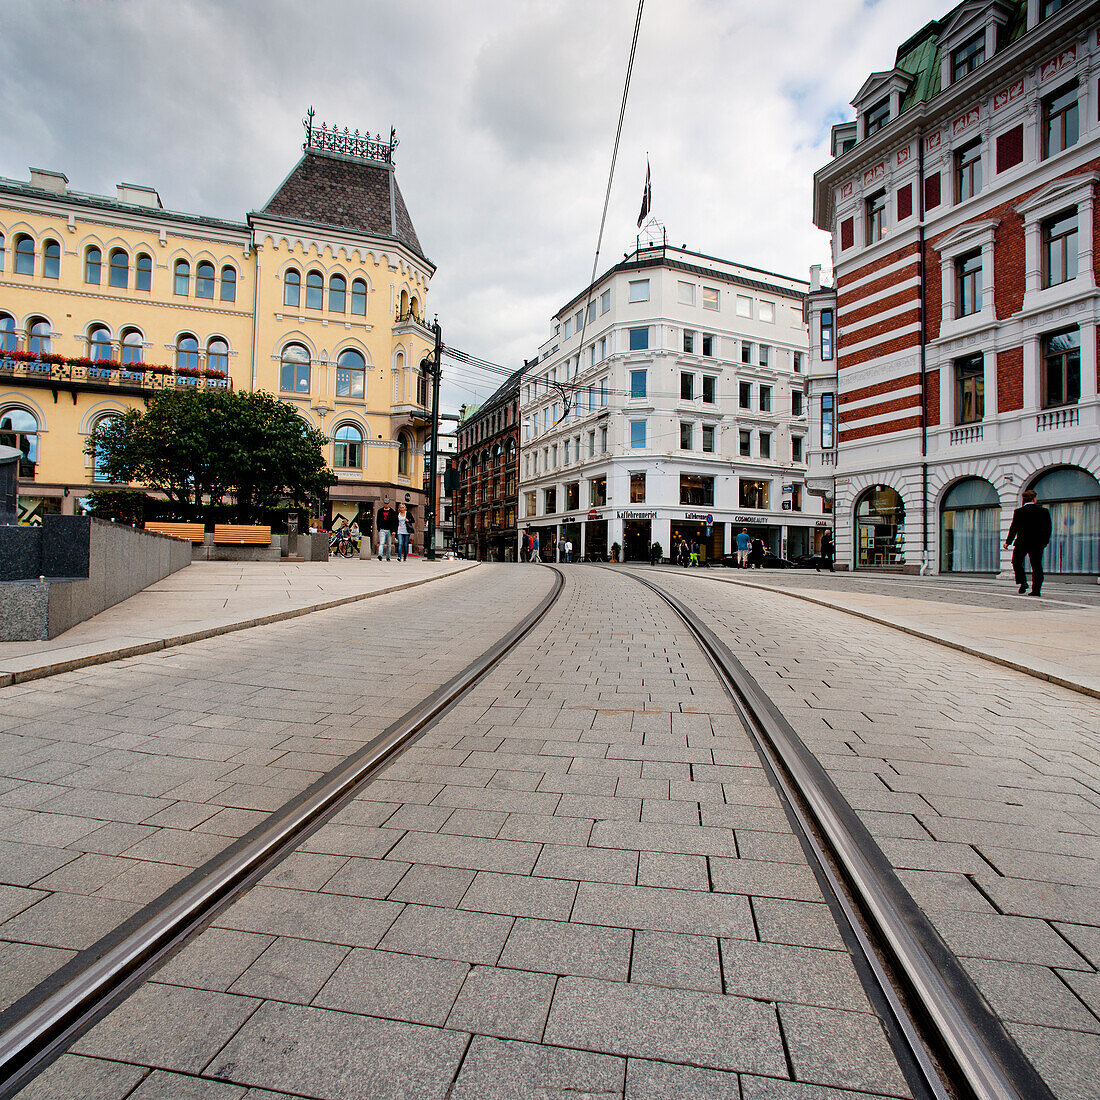 Railway Tracks Along The Road In An Urban Area; Oslo Norway